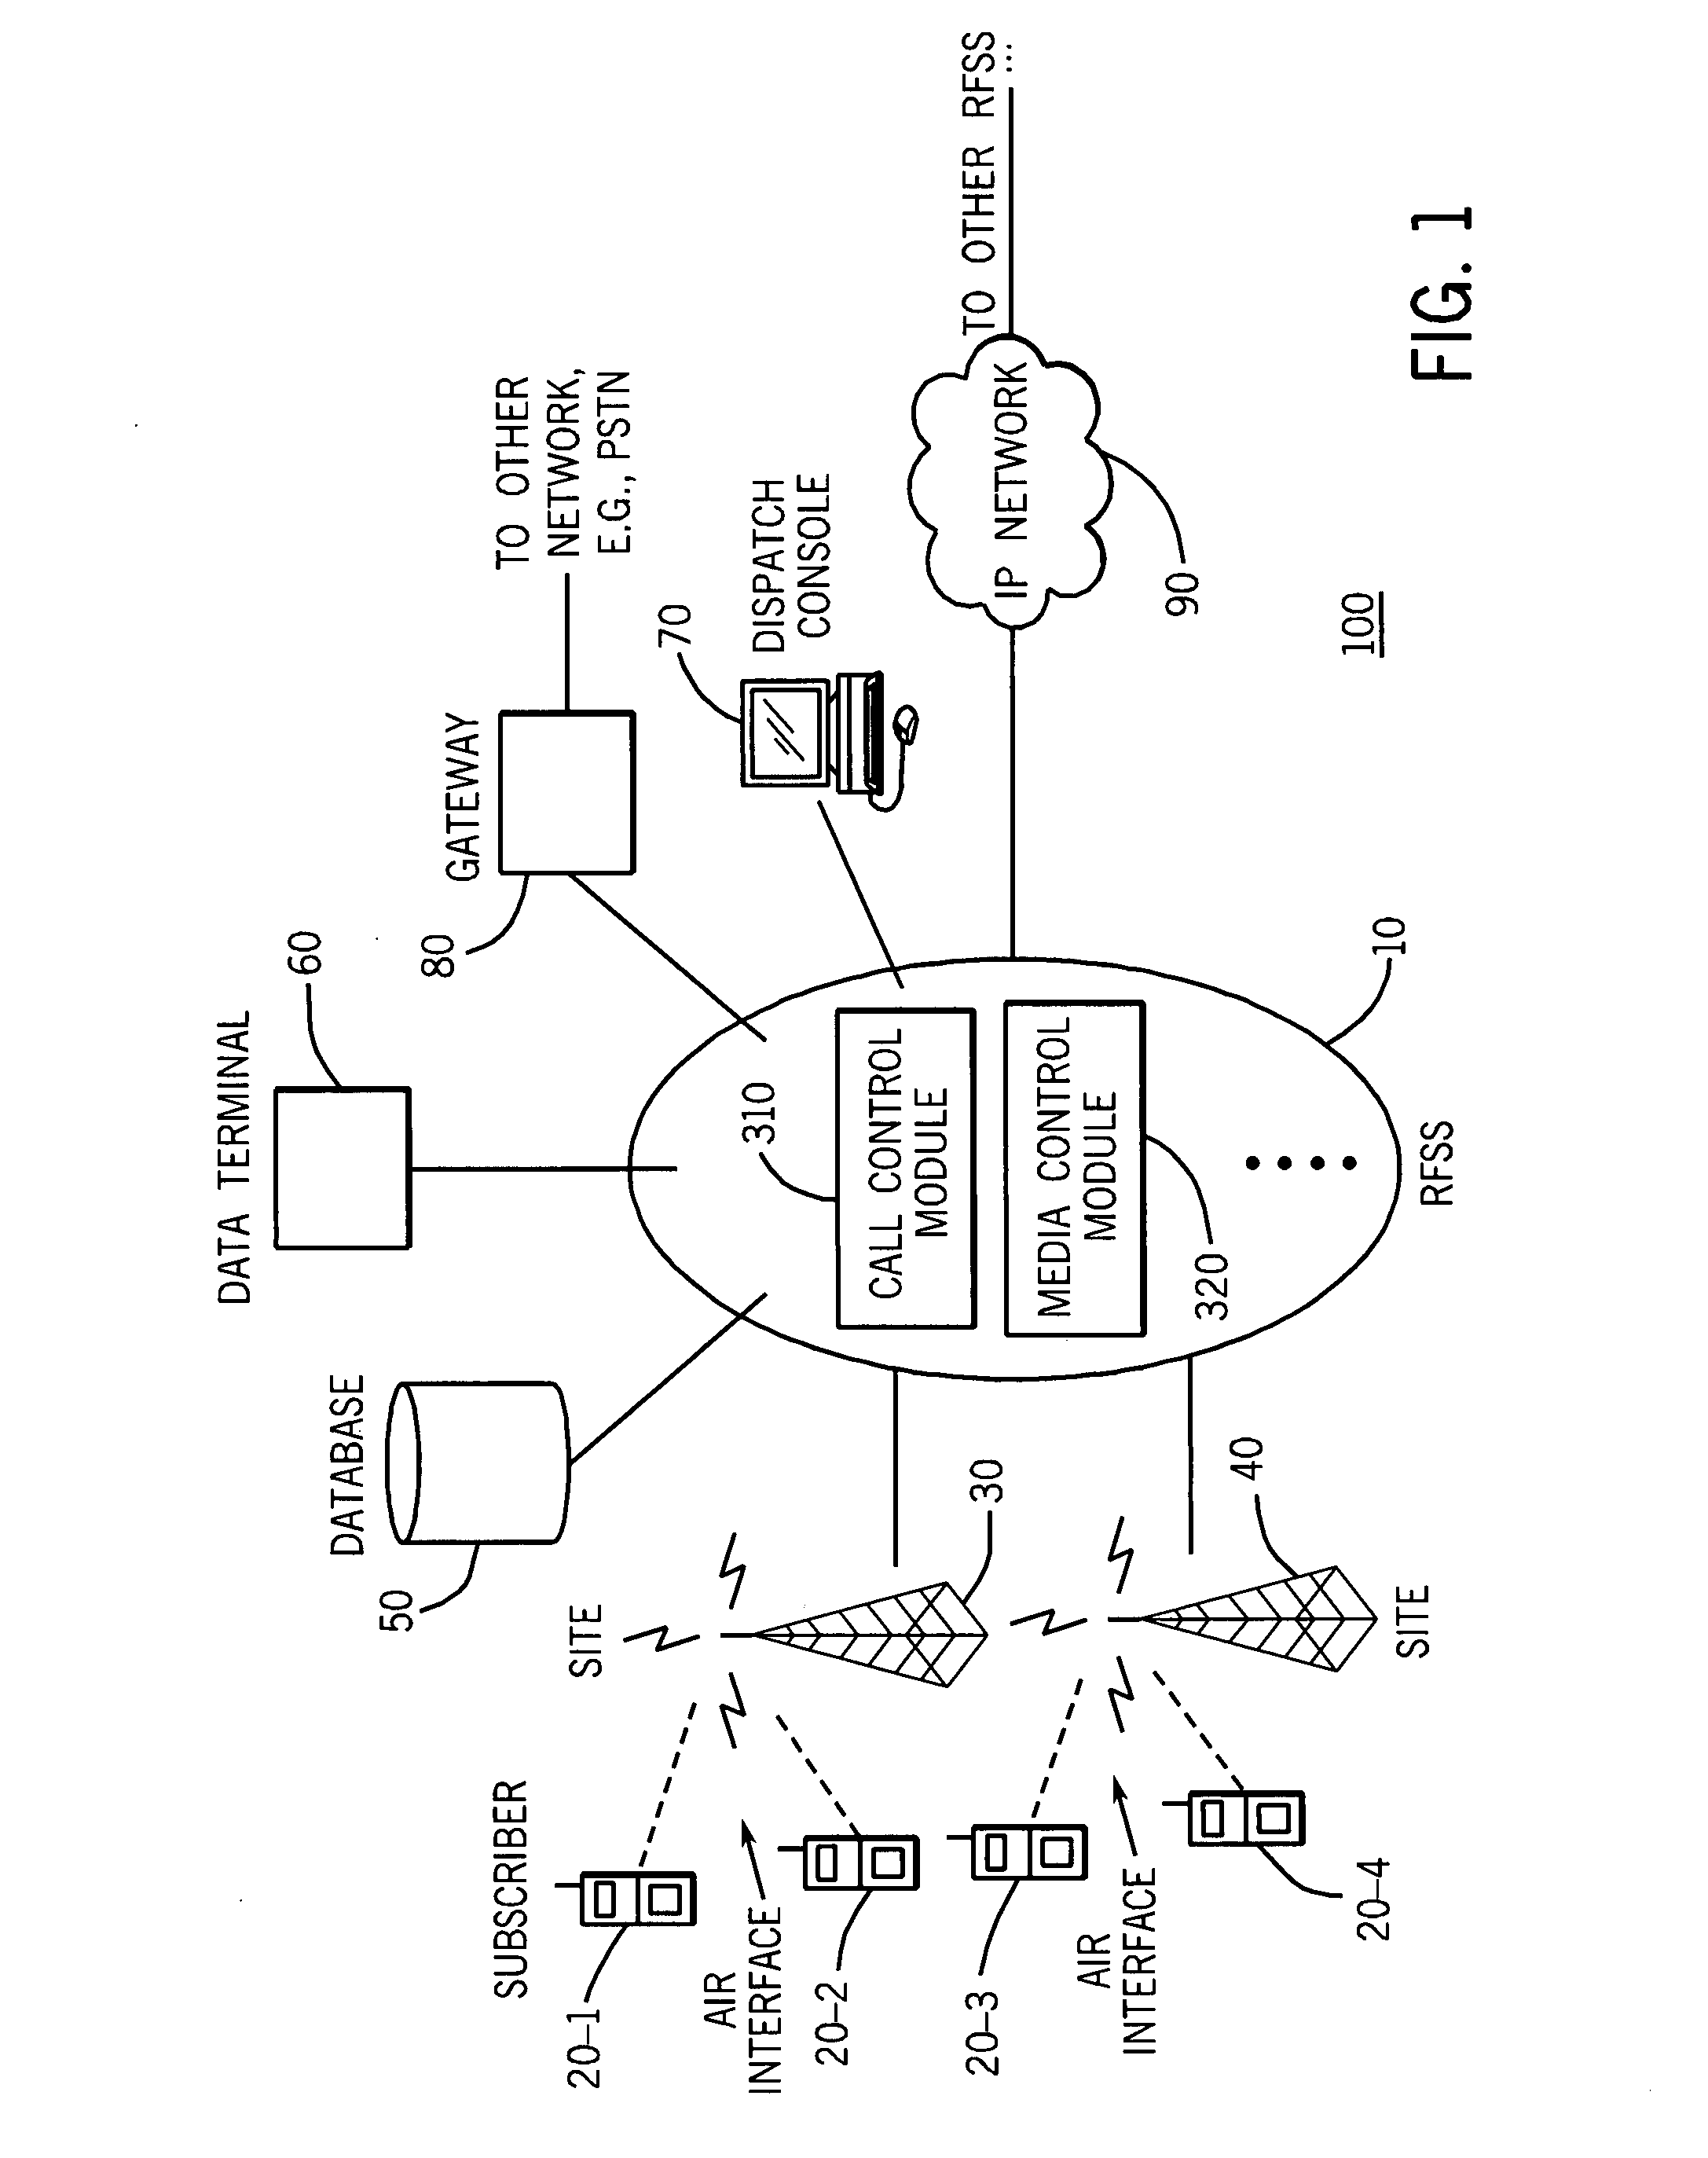 Control procedure for simultaneous media communications within a talk group in communication networks for public safety